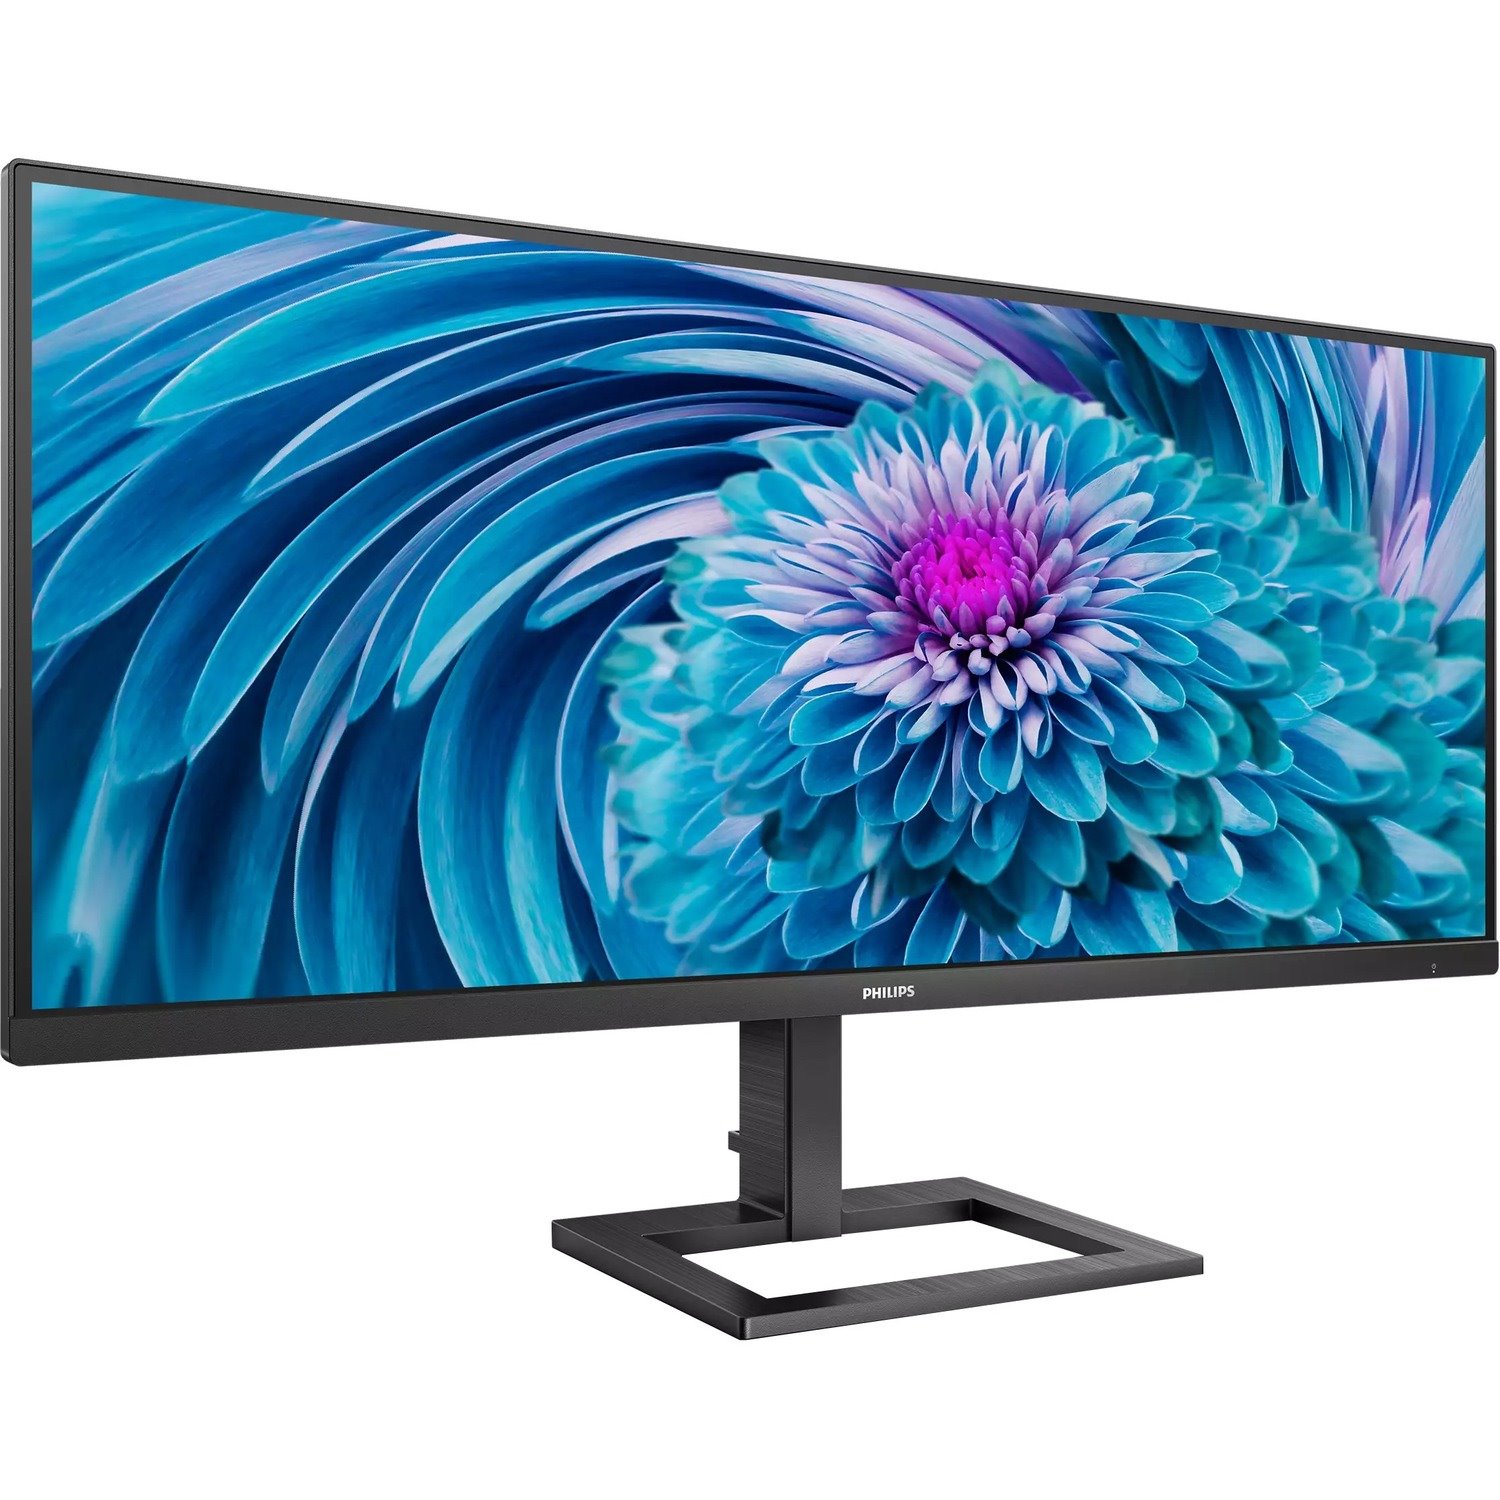 Philips 345E2LE 34" UW-QHD WLED LCD Monitor - 21:9 - Textured Black